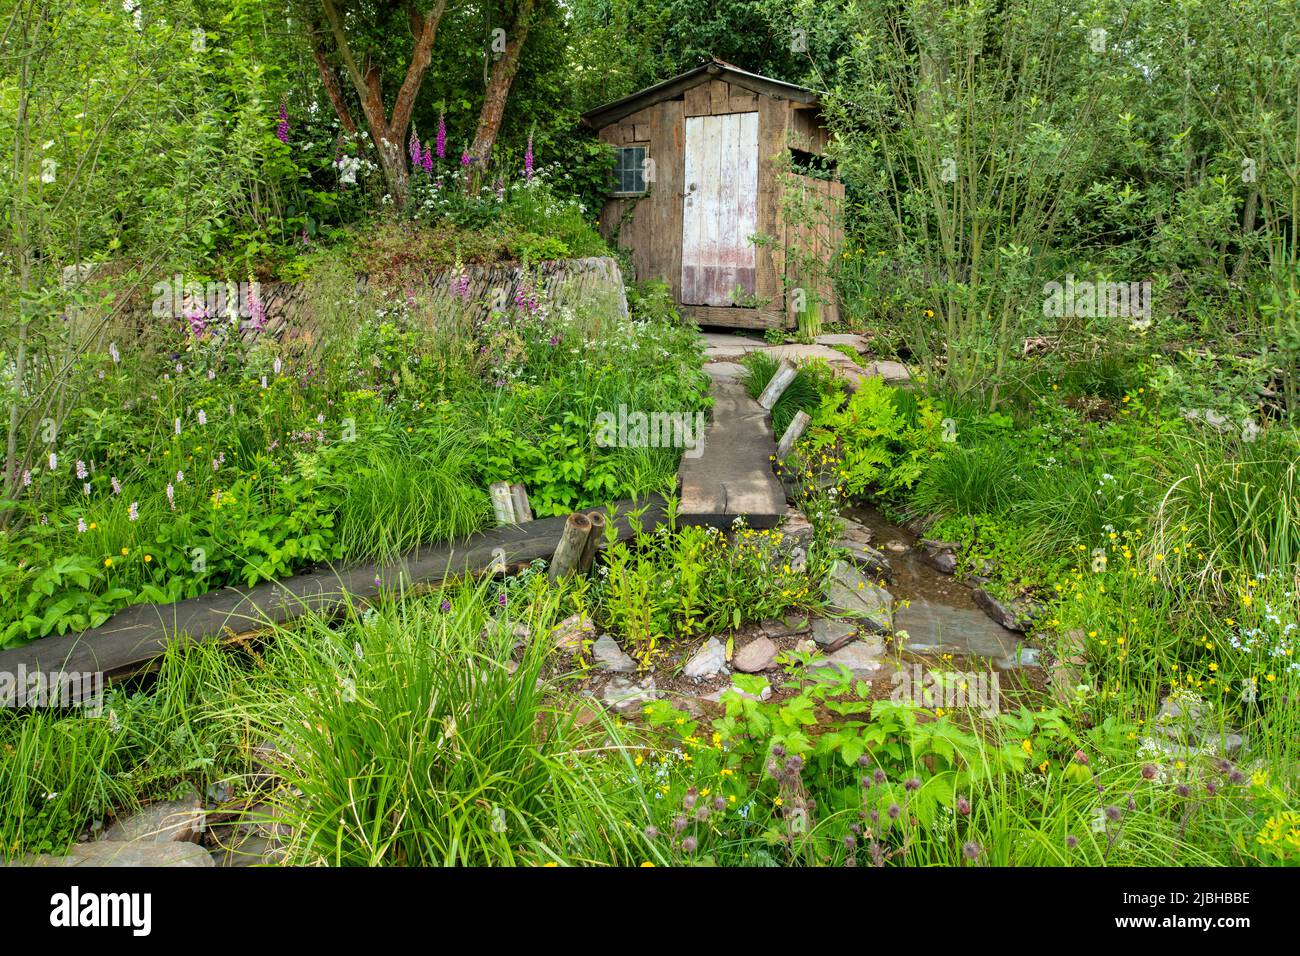 A viewing hide, wooden walkway and a stream surrounded by wildflowers and trees in A Rewilding Britain Garden designed by Lulu Urquart and Adam Hunt. Stock Photo